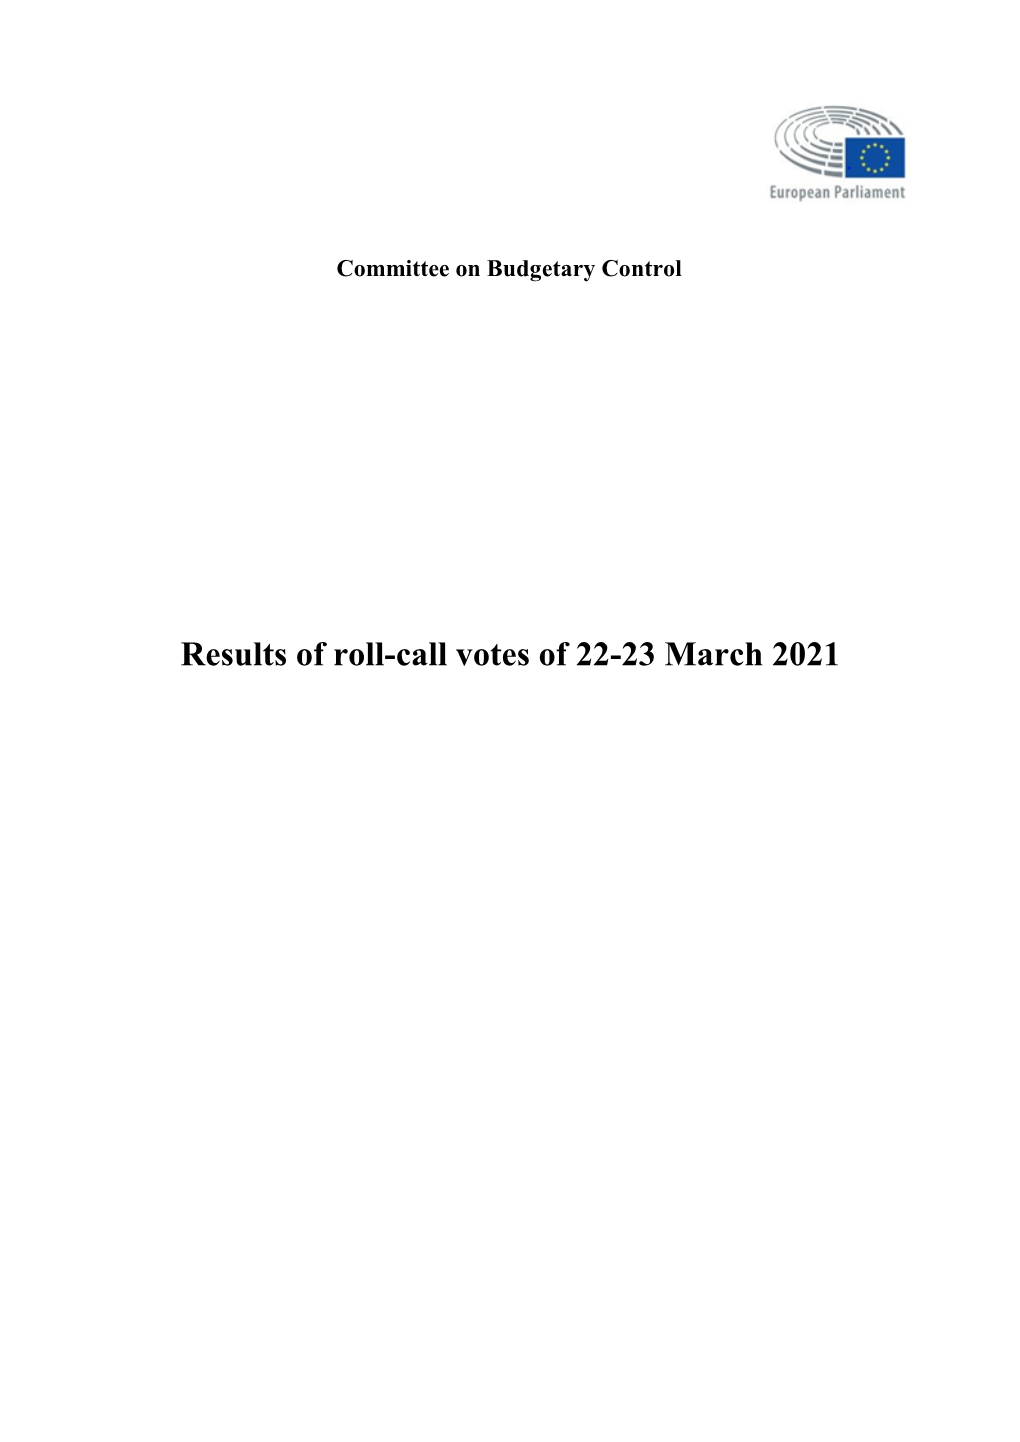 Results of Roll-Call Votes of 22-23 March 2021